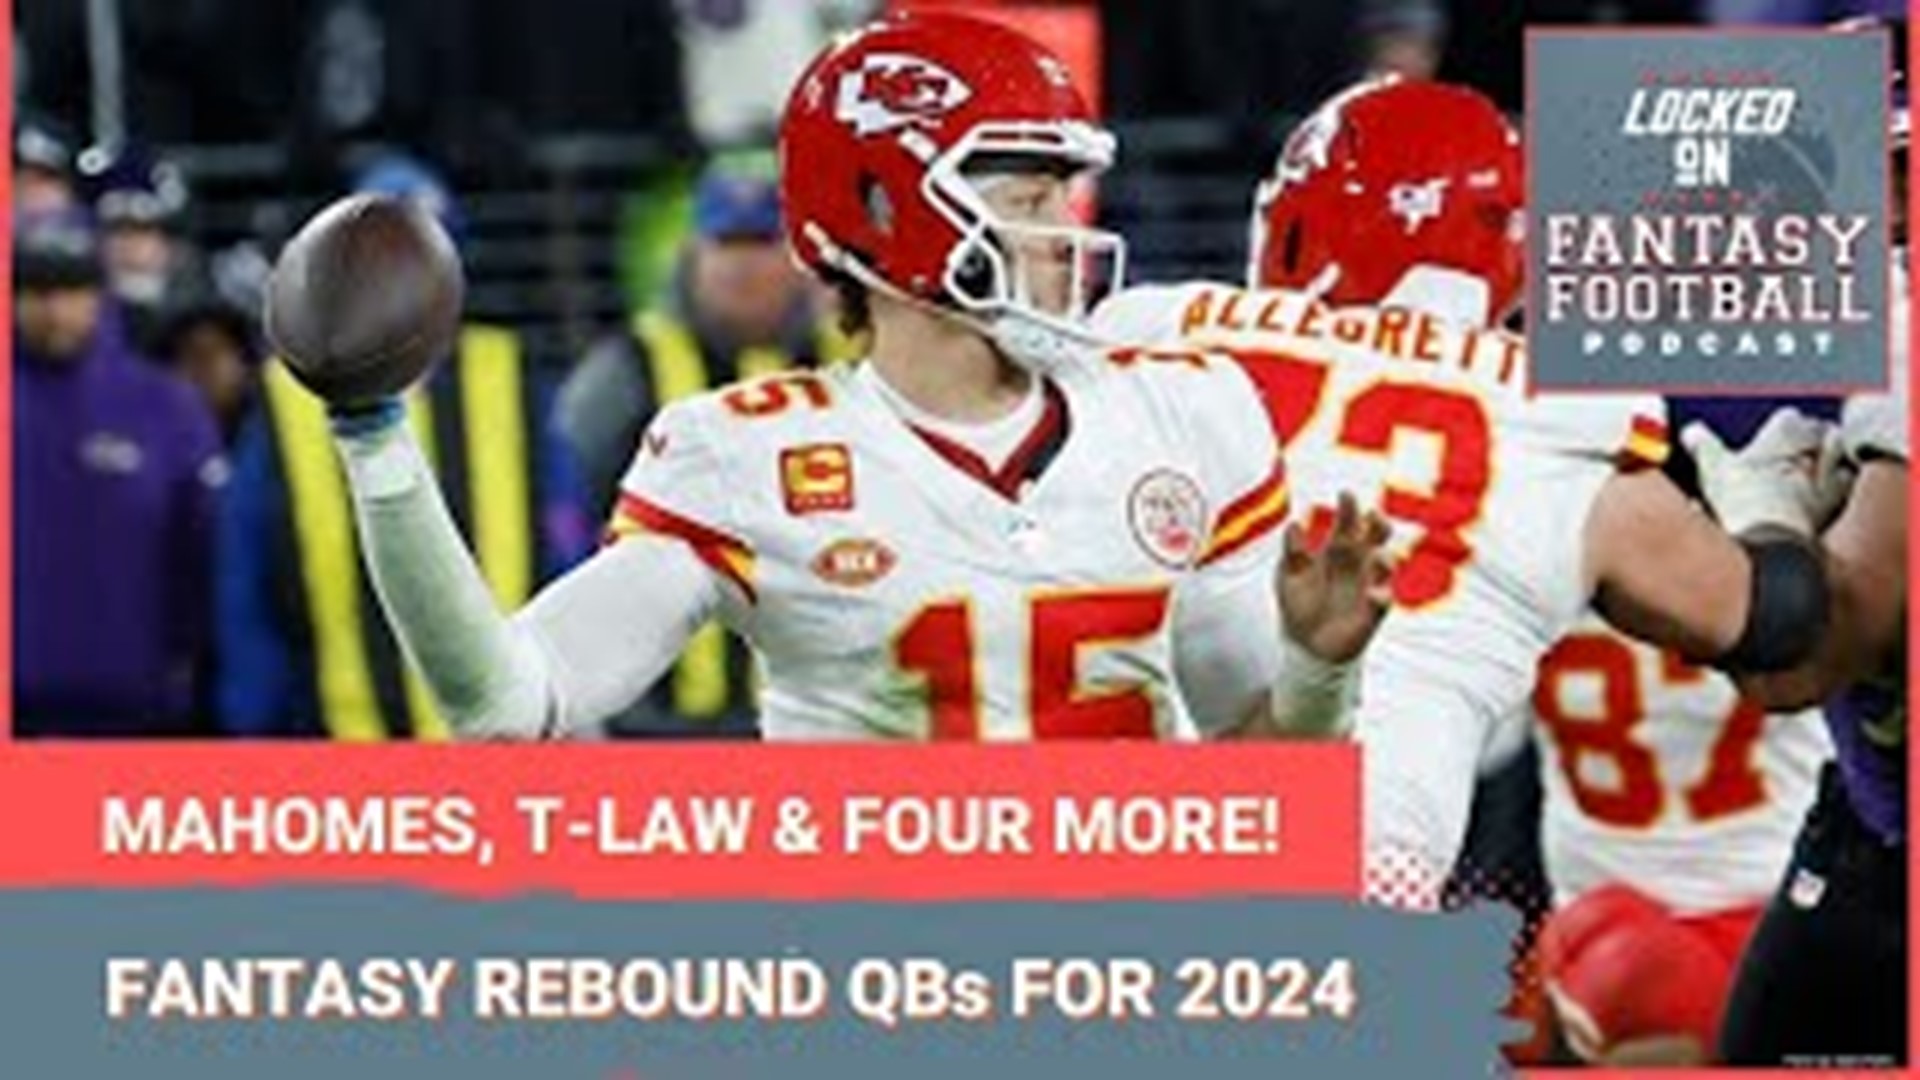 Sporting News' Vinnie Iyer and NFL.com's Michelle Magdziuk look at six quarterbacks who should be positioned well to rebound with their fantasy football production.